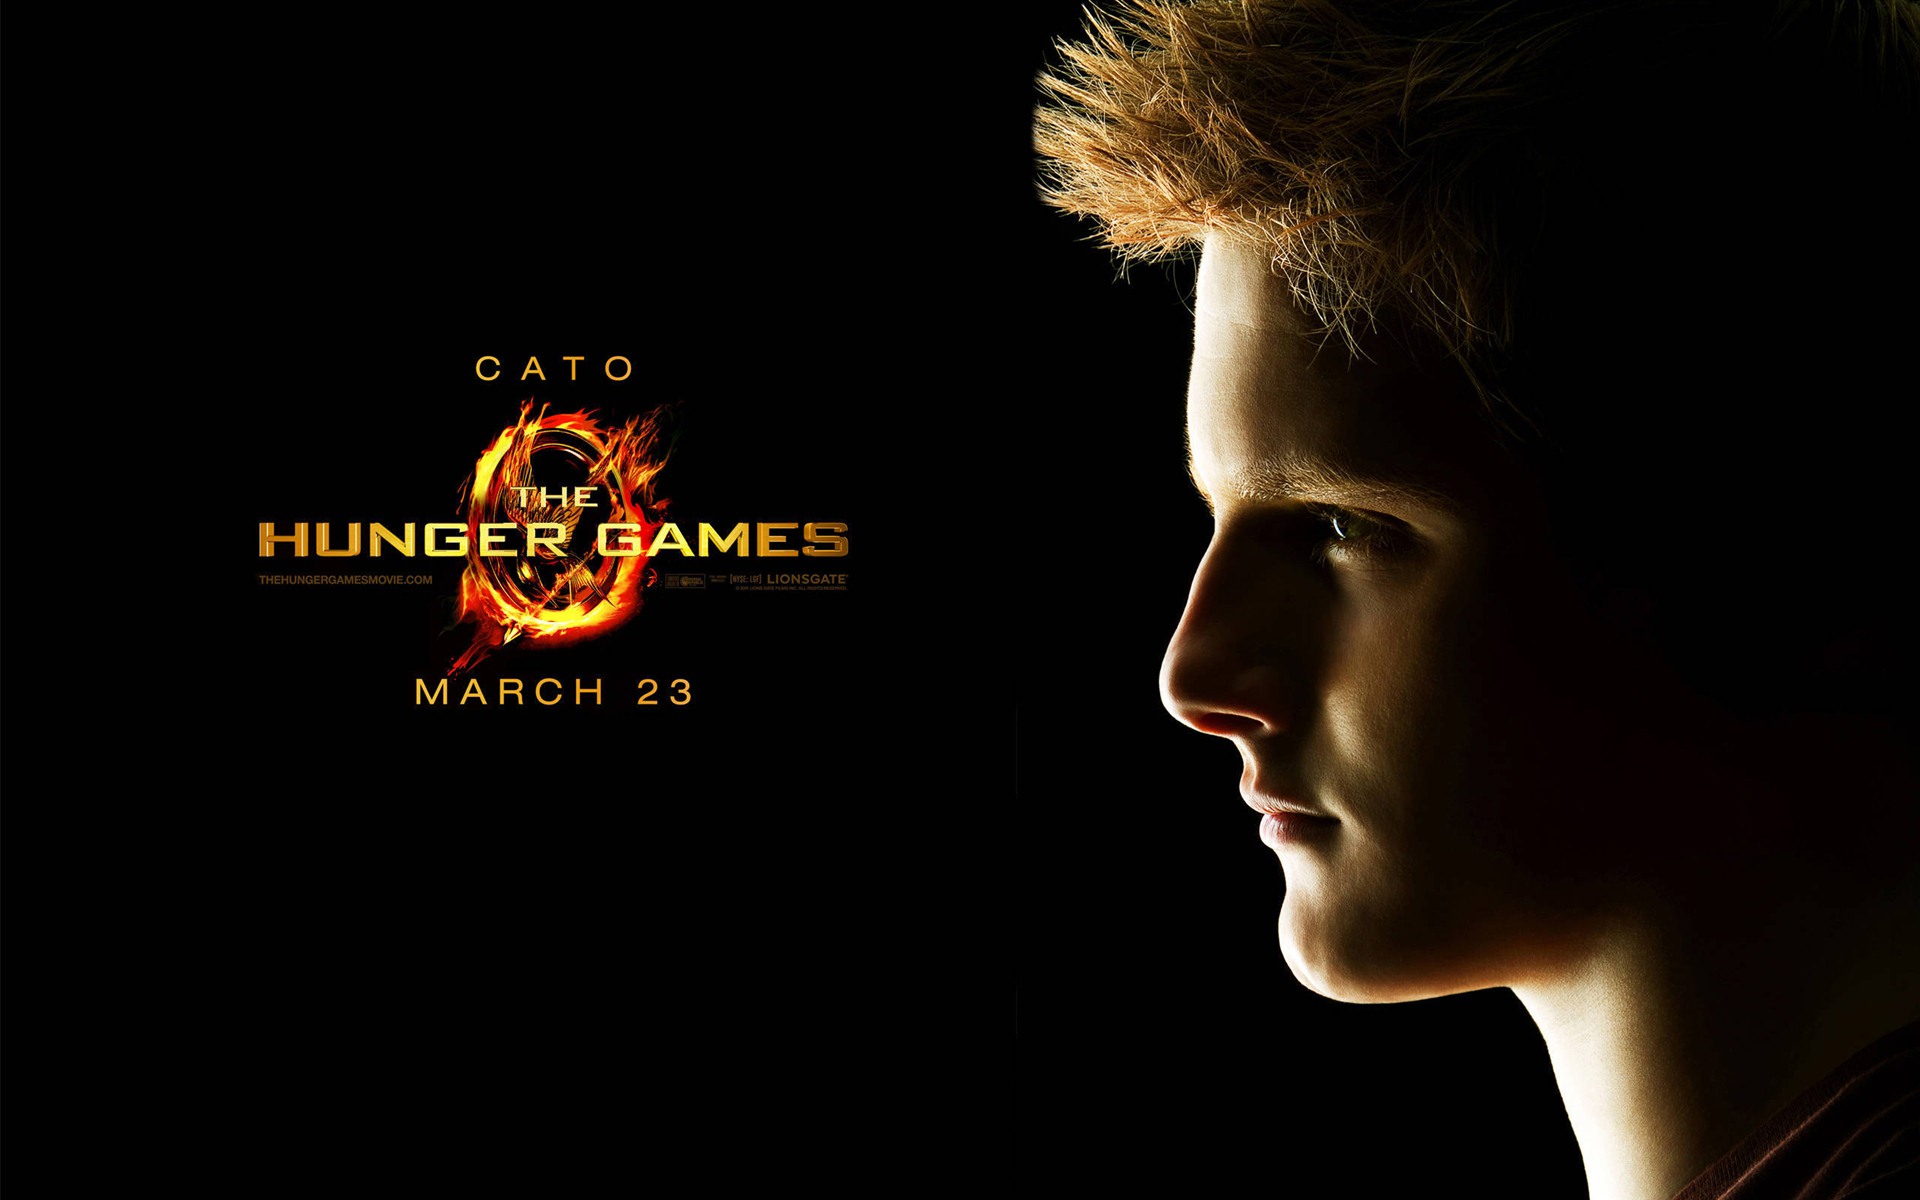 The Hunger Games HD wallpapers #3 - 1920x1200